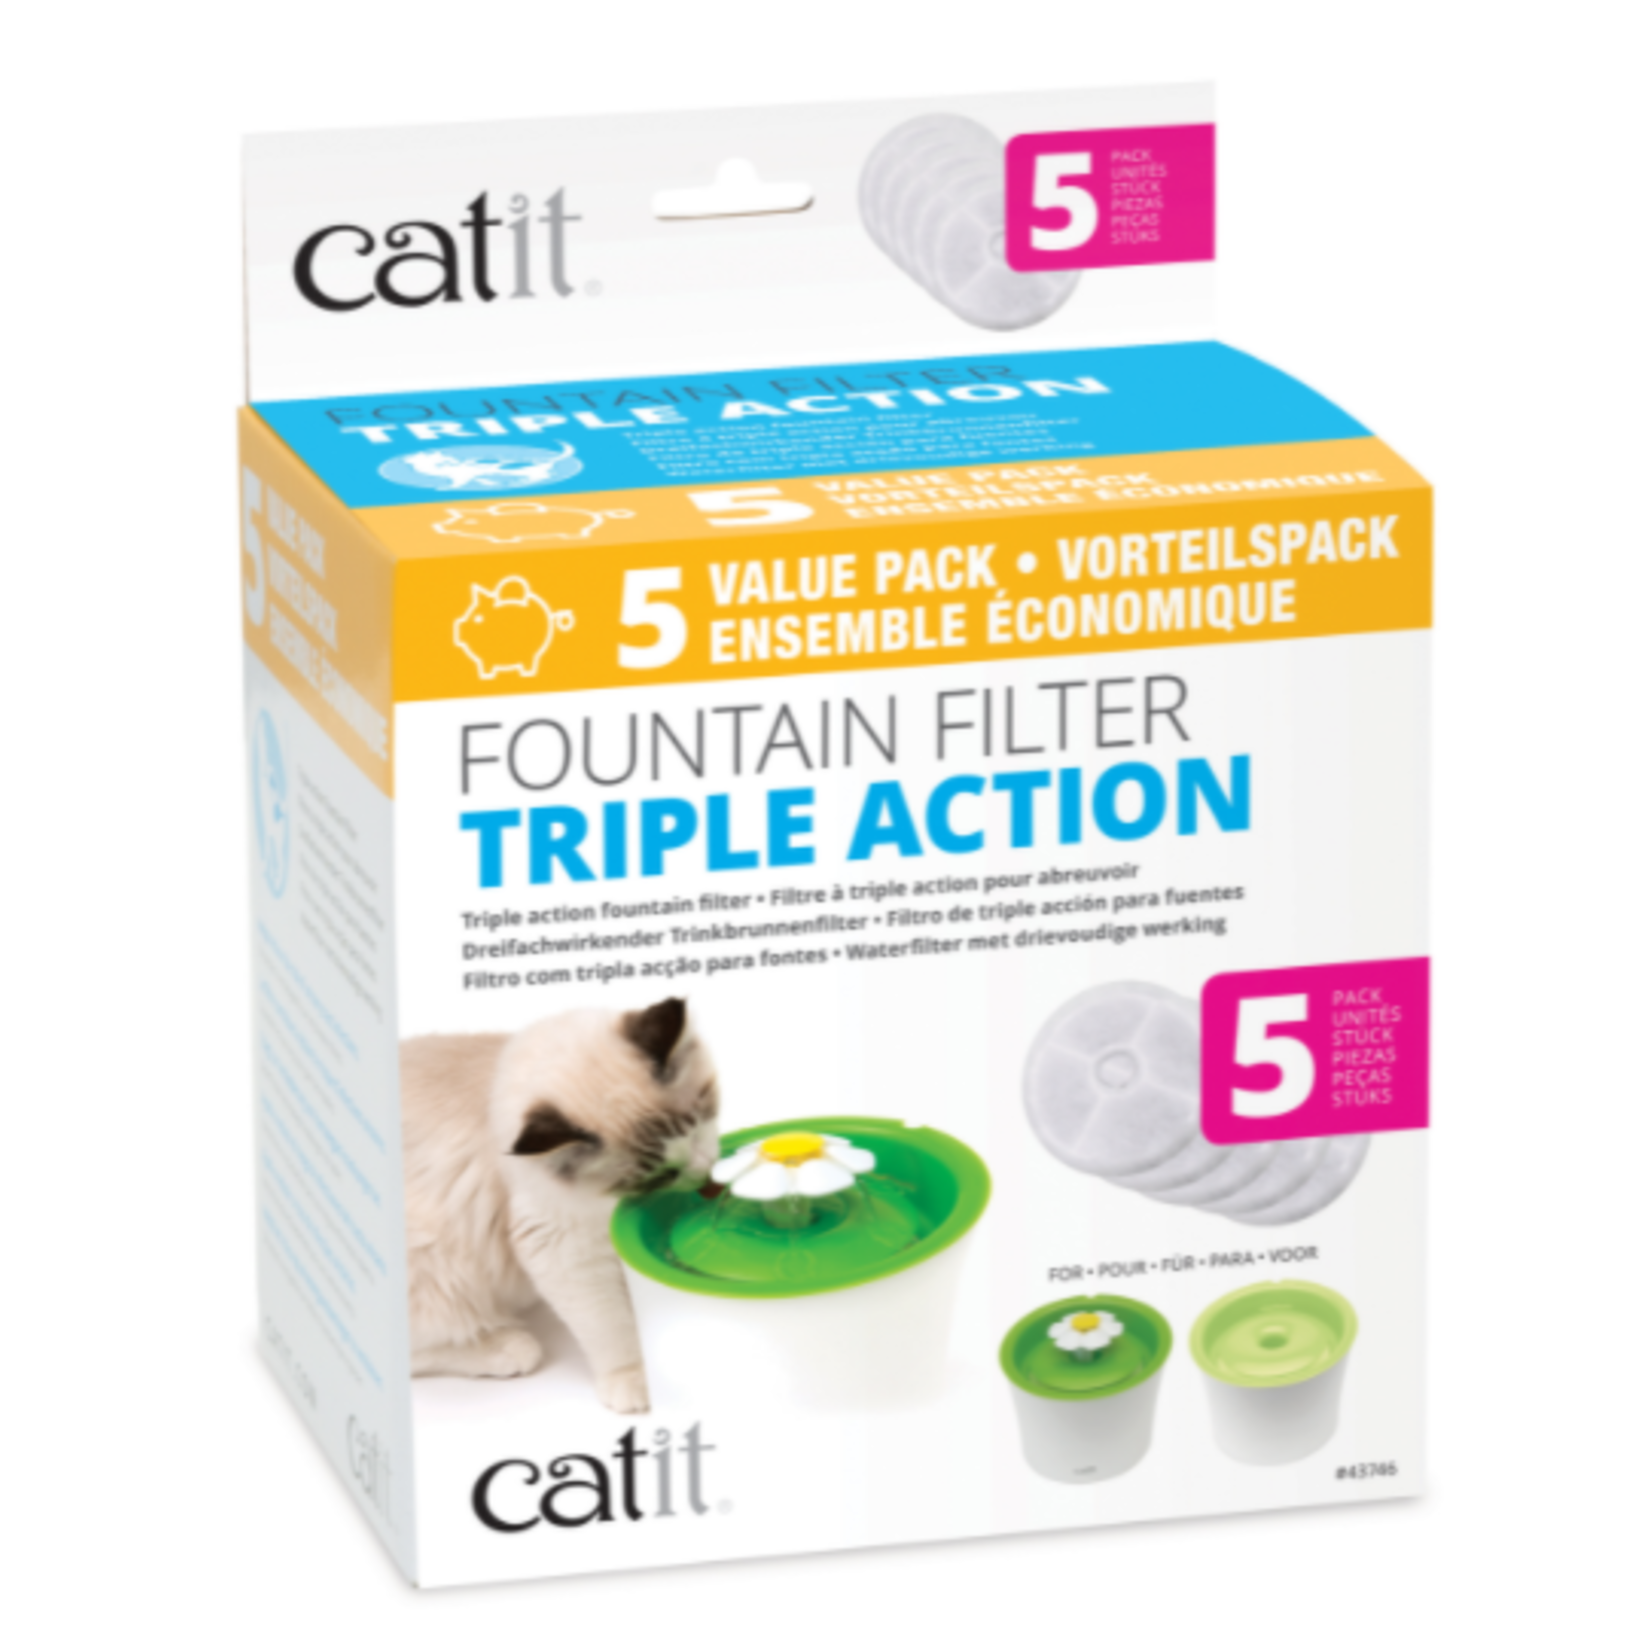 Catit Triple Action Fountain Filter - pack of 5